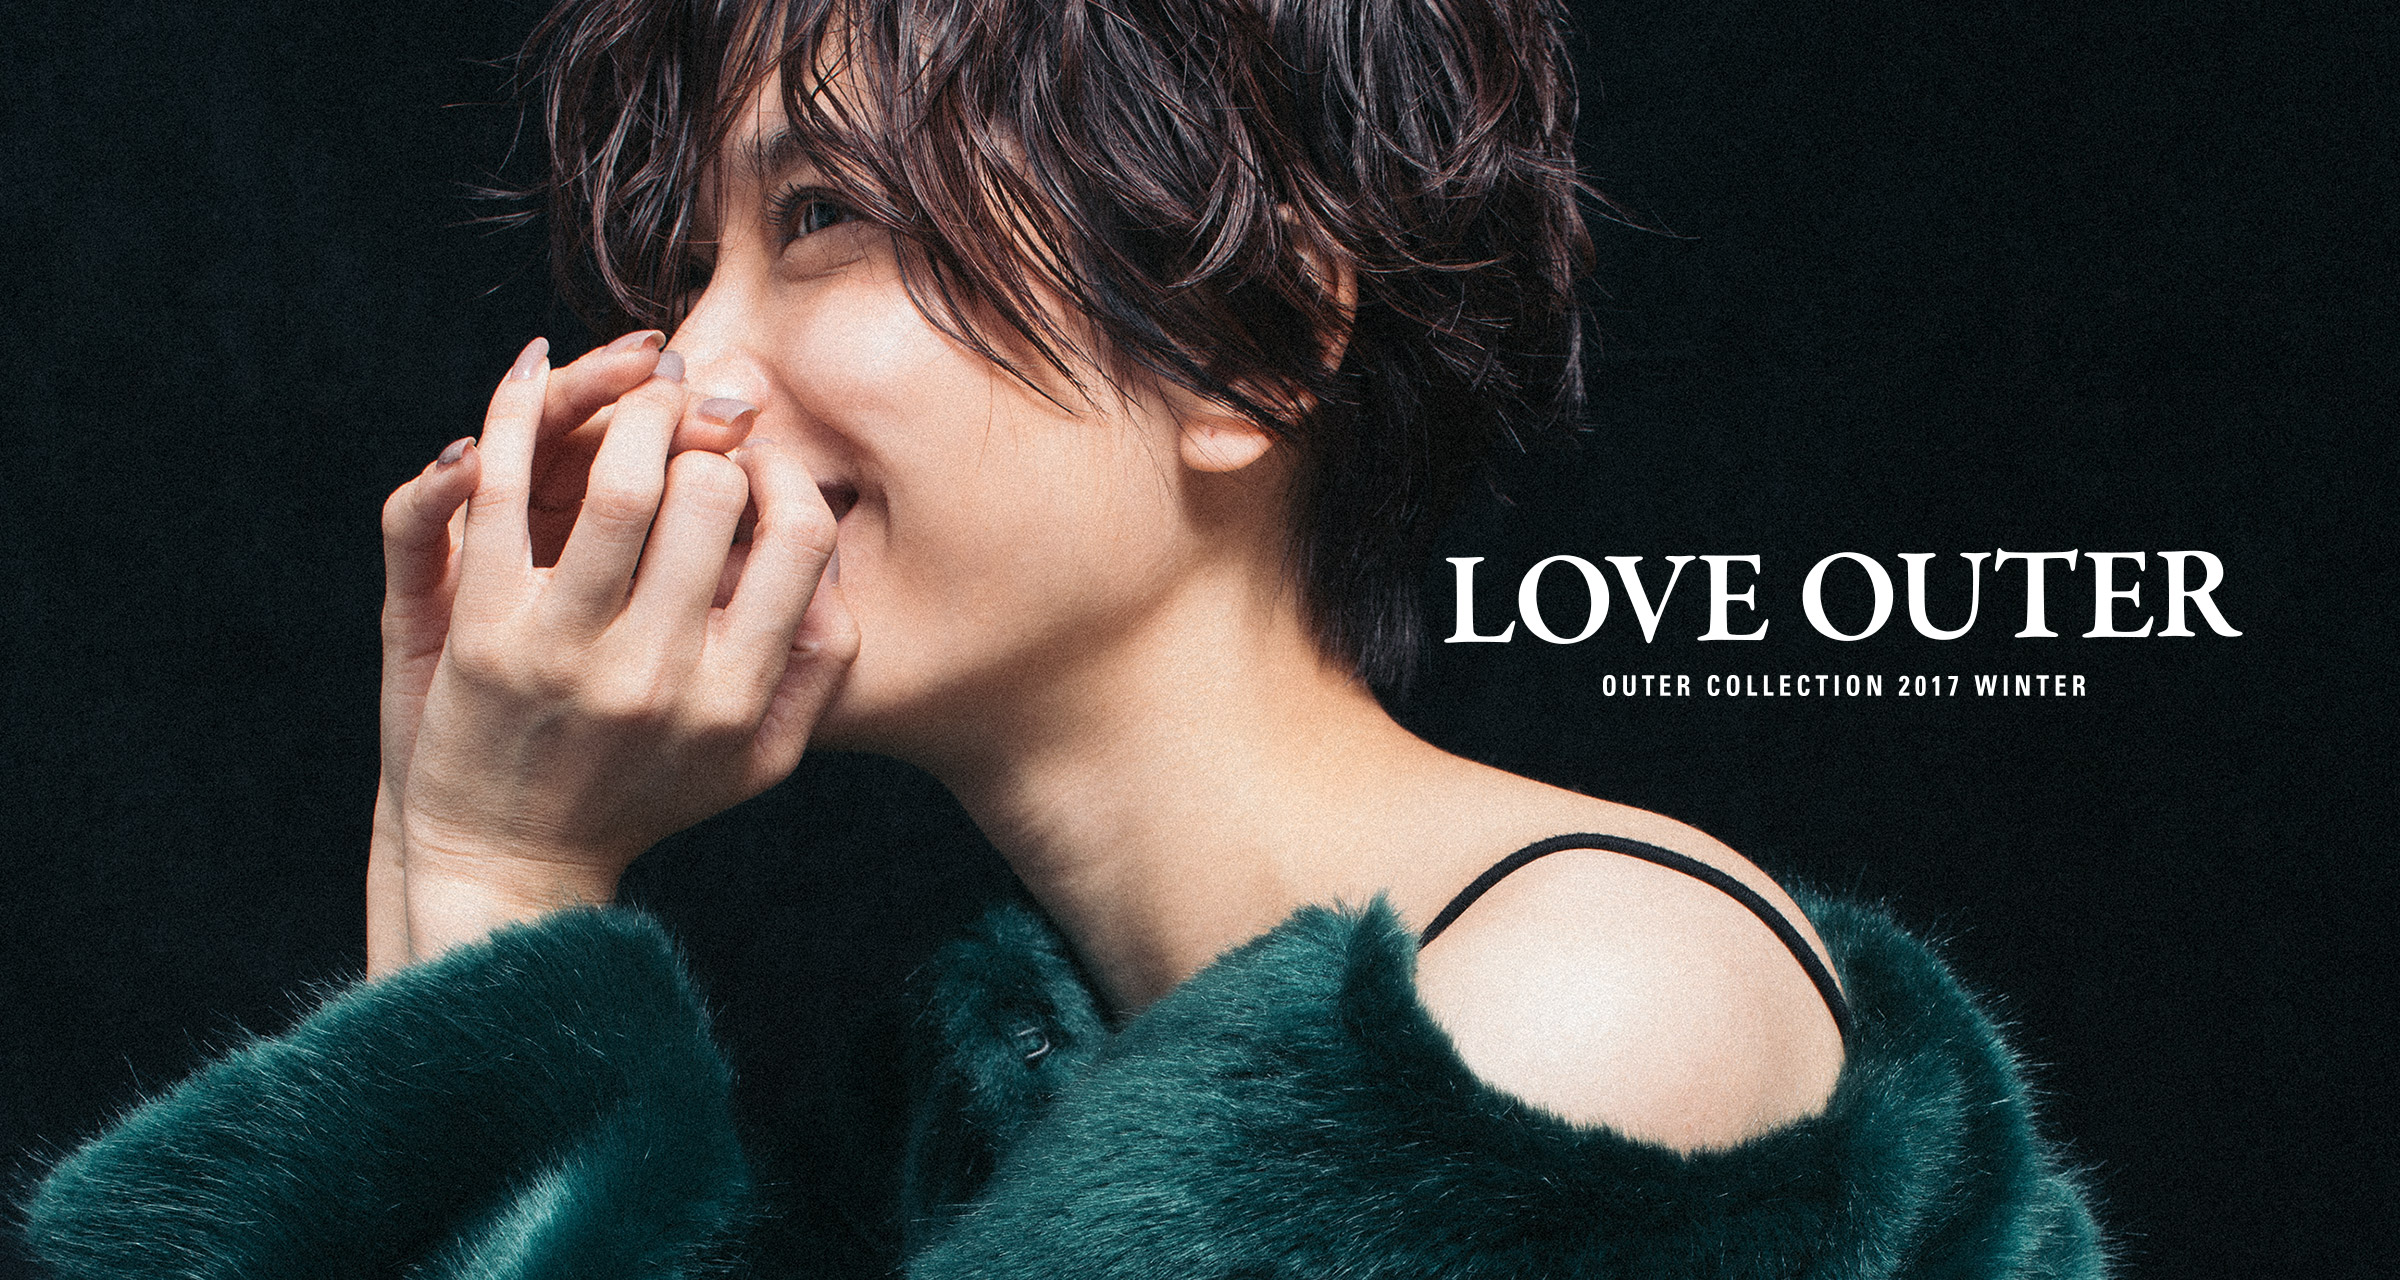 LOVE OUTER OUTER COLLECTION 2017 WINTER